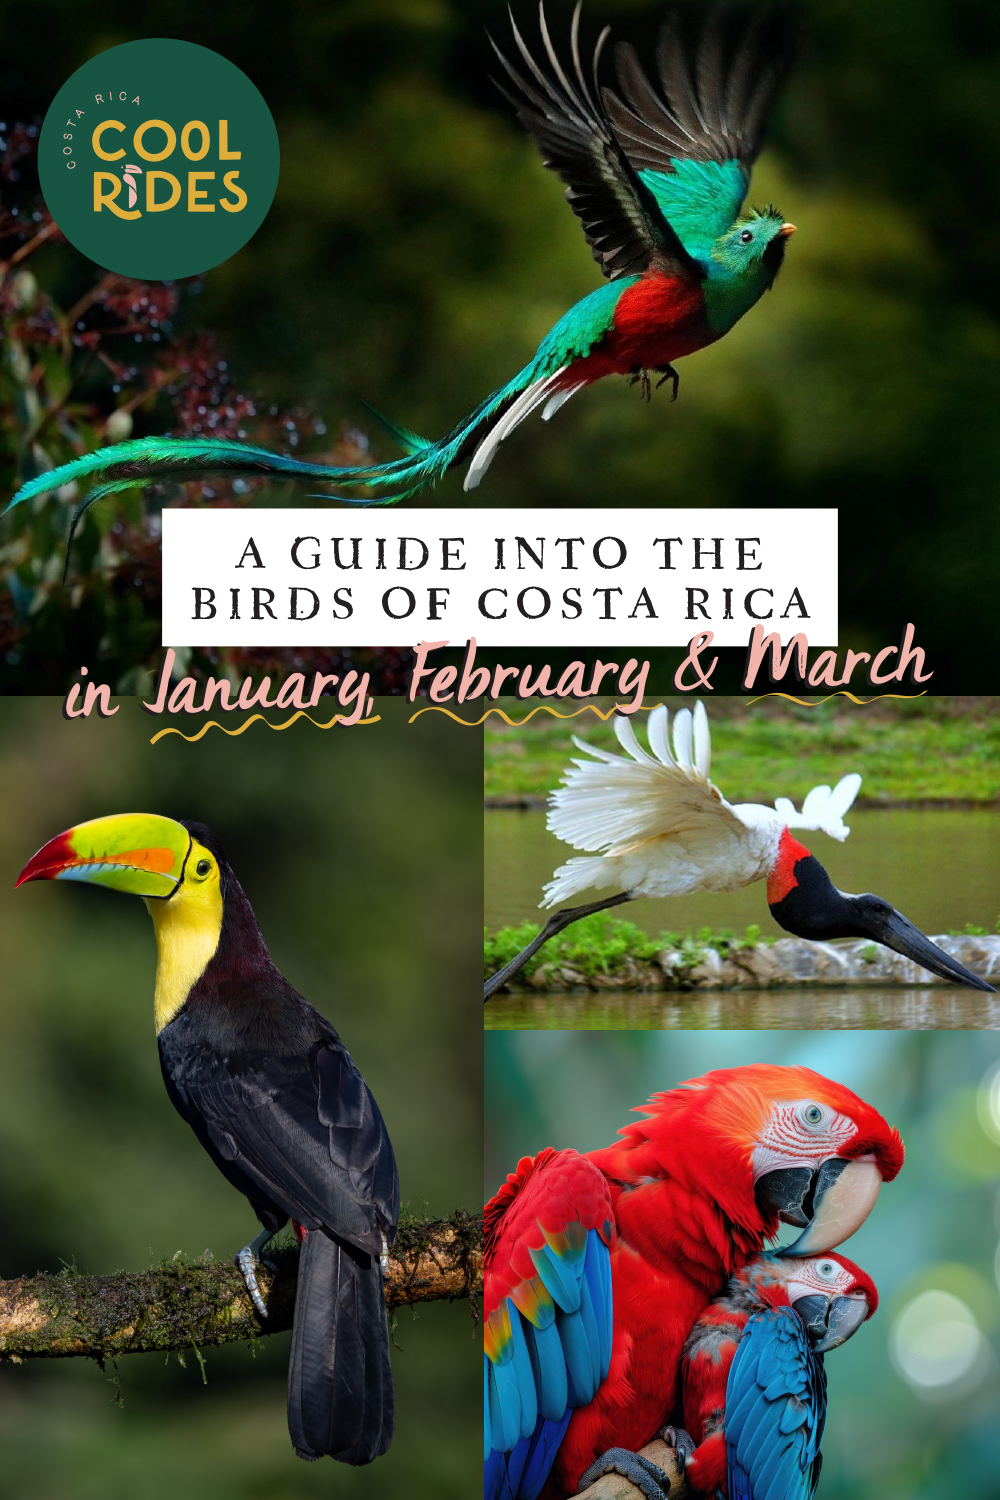 https://www.costaricacoolrides.com/tips-on-planning-a-trip-to-costa-rica/birdwatching-in-costa-rica-in-january-february-and-march